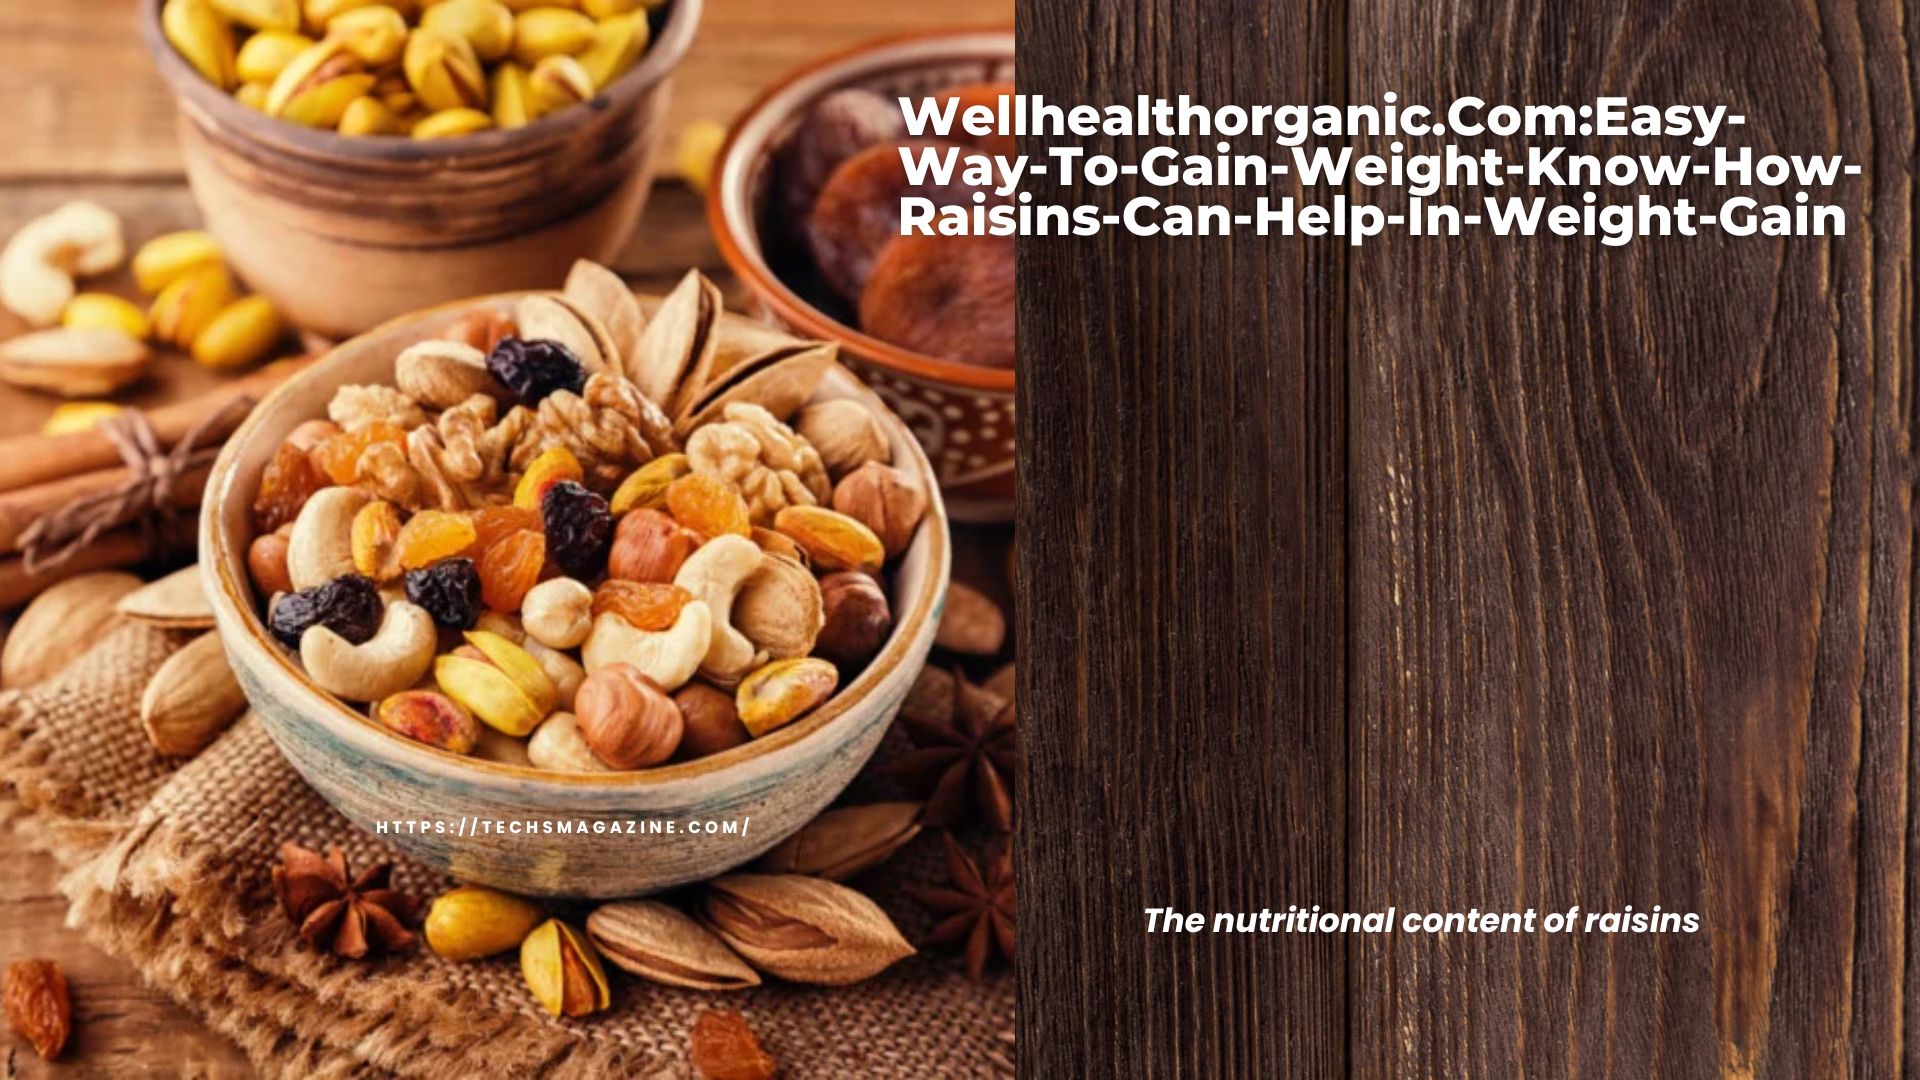 Wellhealthorganic.Com:Easy-Way-To-Gain-Weight-Know-How-Raisins-Can-Help-In-Weight-Gain